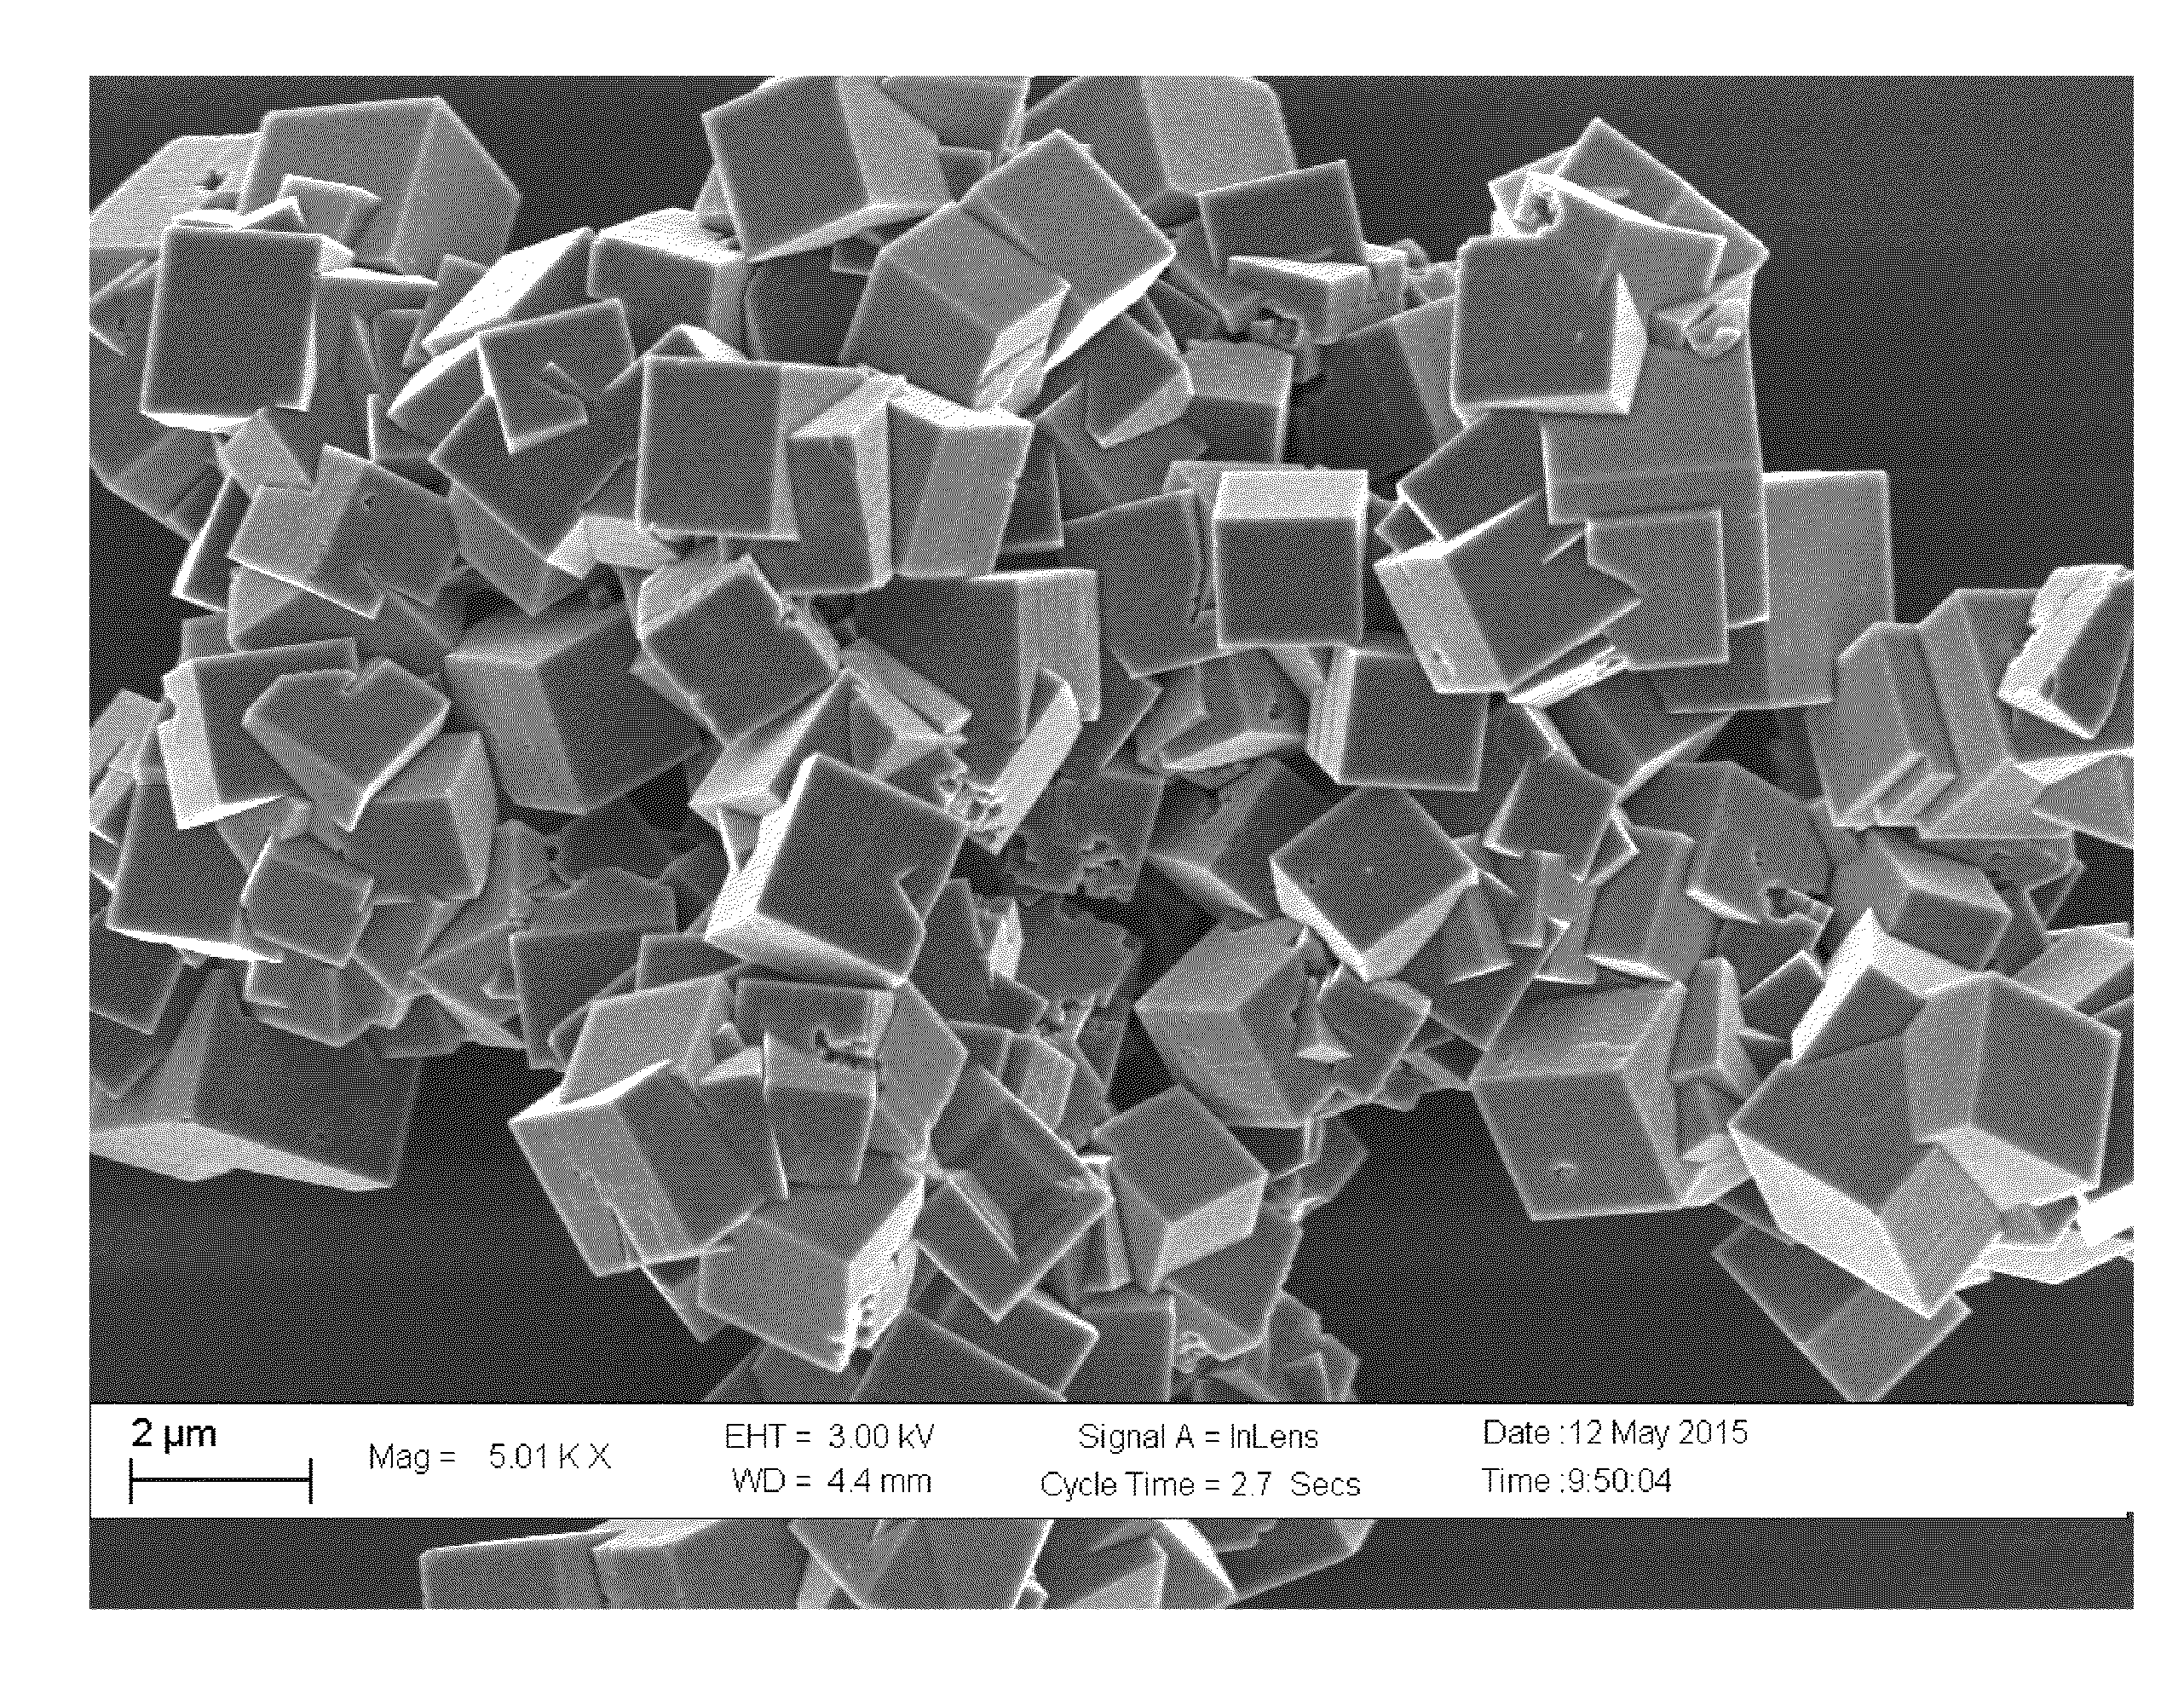 Surface-modified cyanide-based transition metal compounds